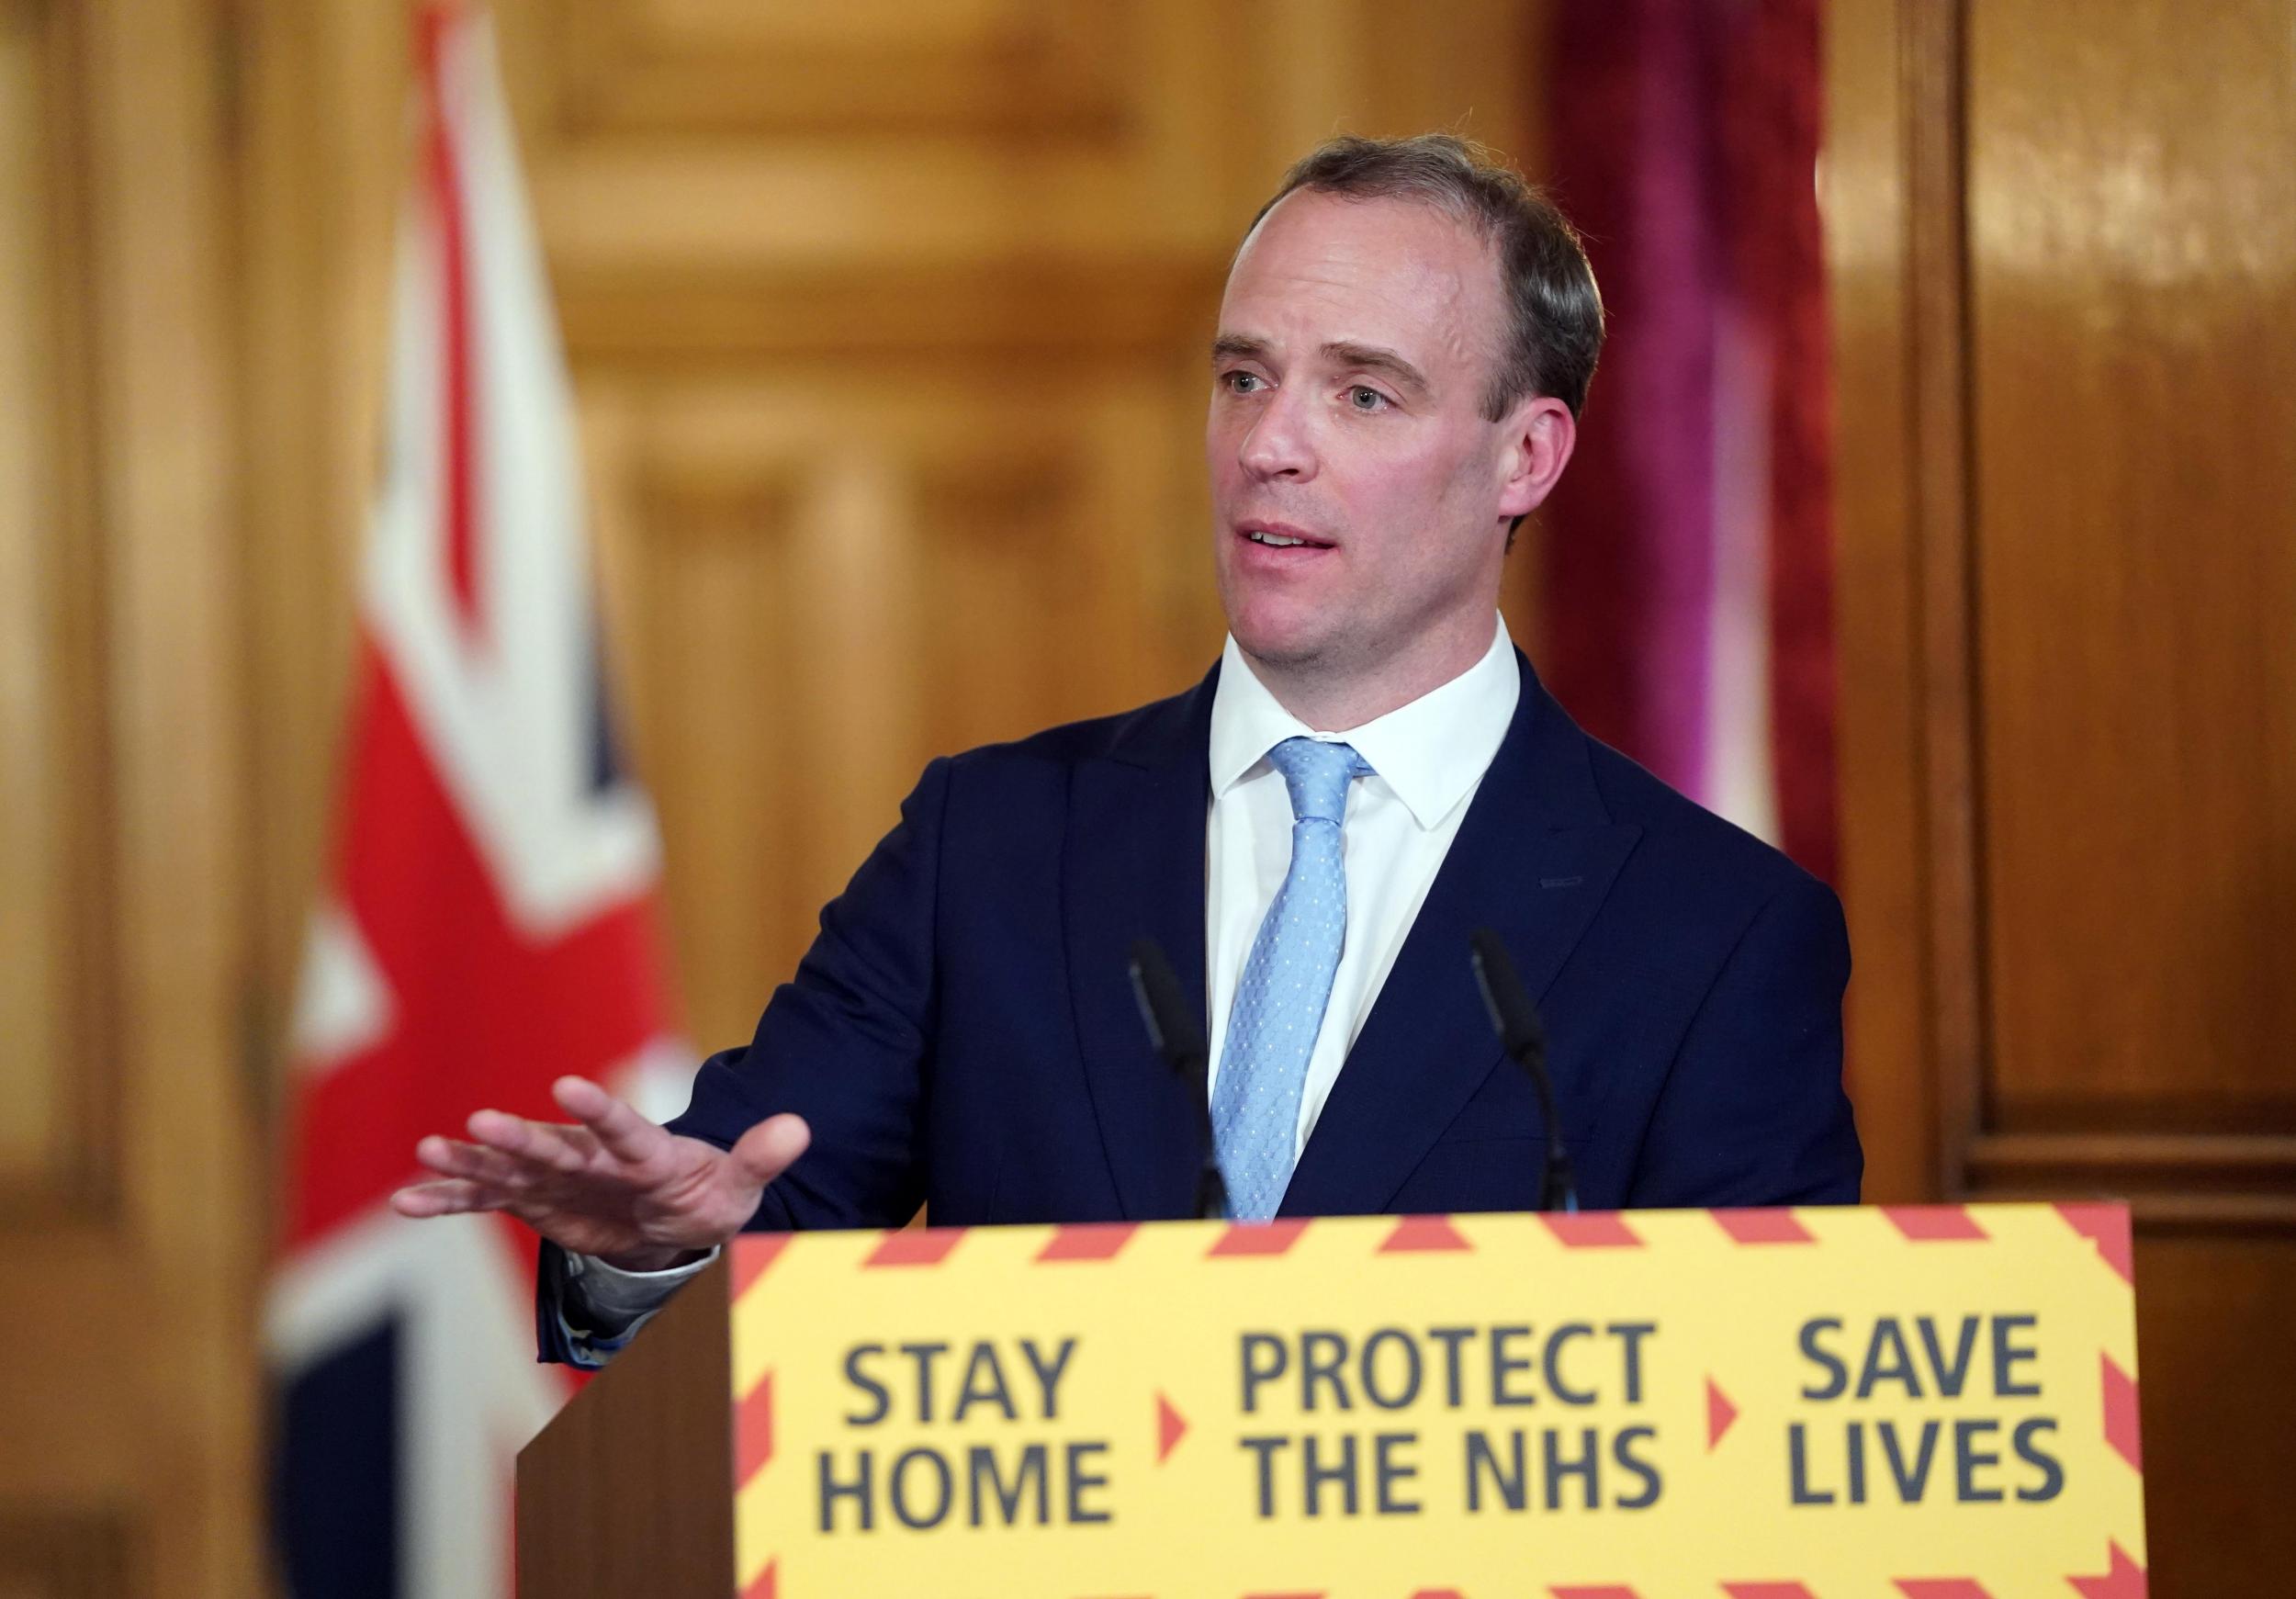 Now Boris Johnson is in intensive care, this is what Dominic Raab needs to do tonight